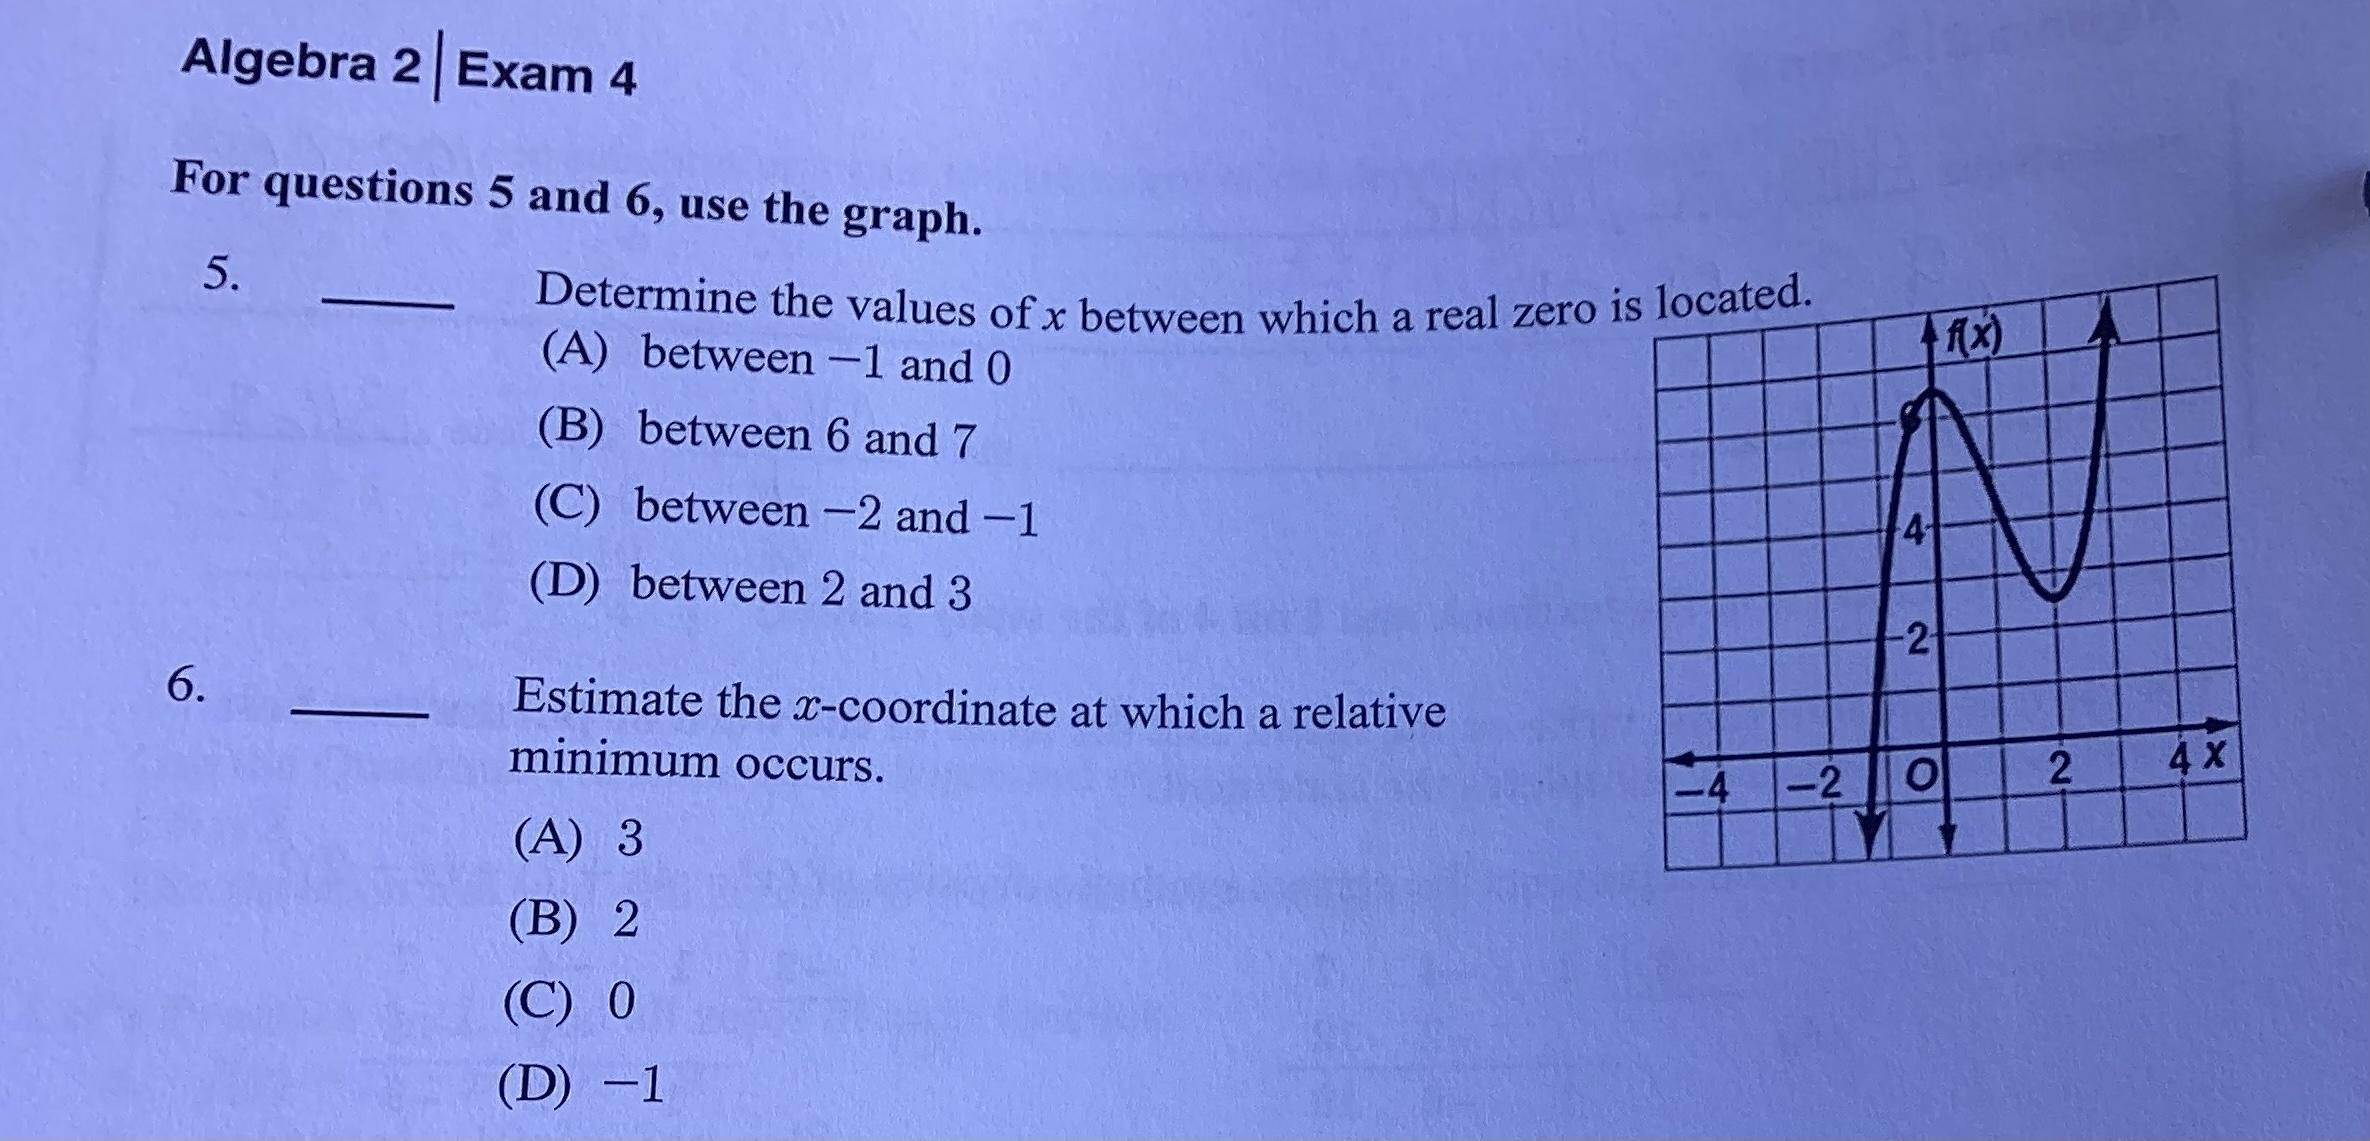 50 Points! 2 Multiple Choice Algebra Questions. Photo Attached. For Questions 5 And 6, Use The Graph.